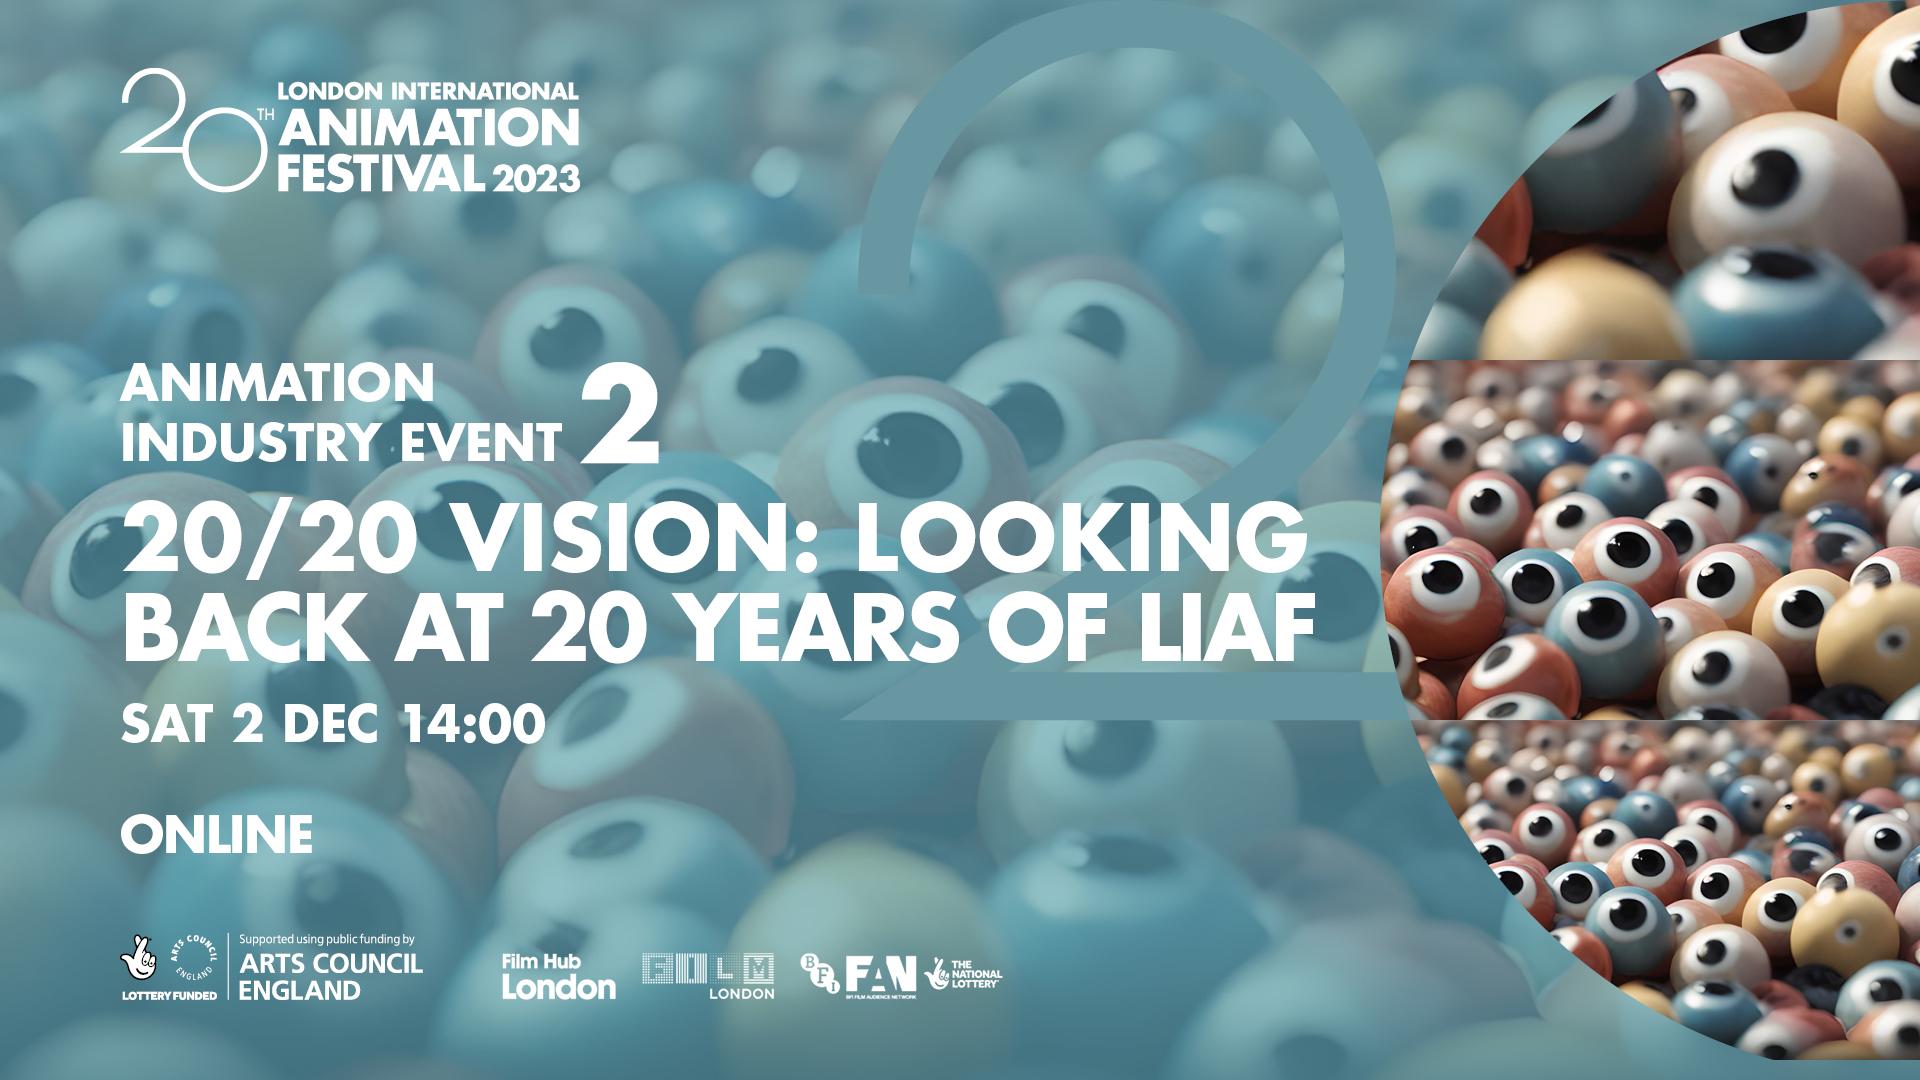 Animation Industry Event 2: 20/20 Vision - Looking Back at 20 Years of LIAF